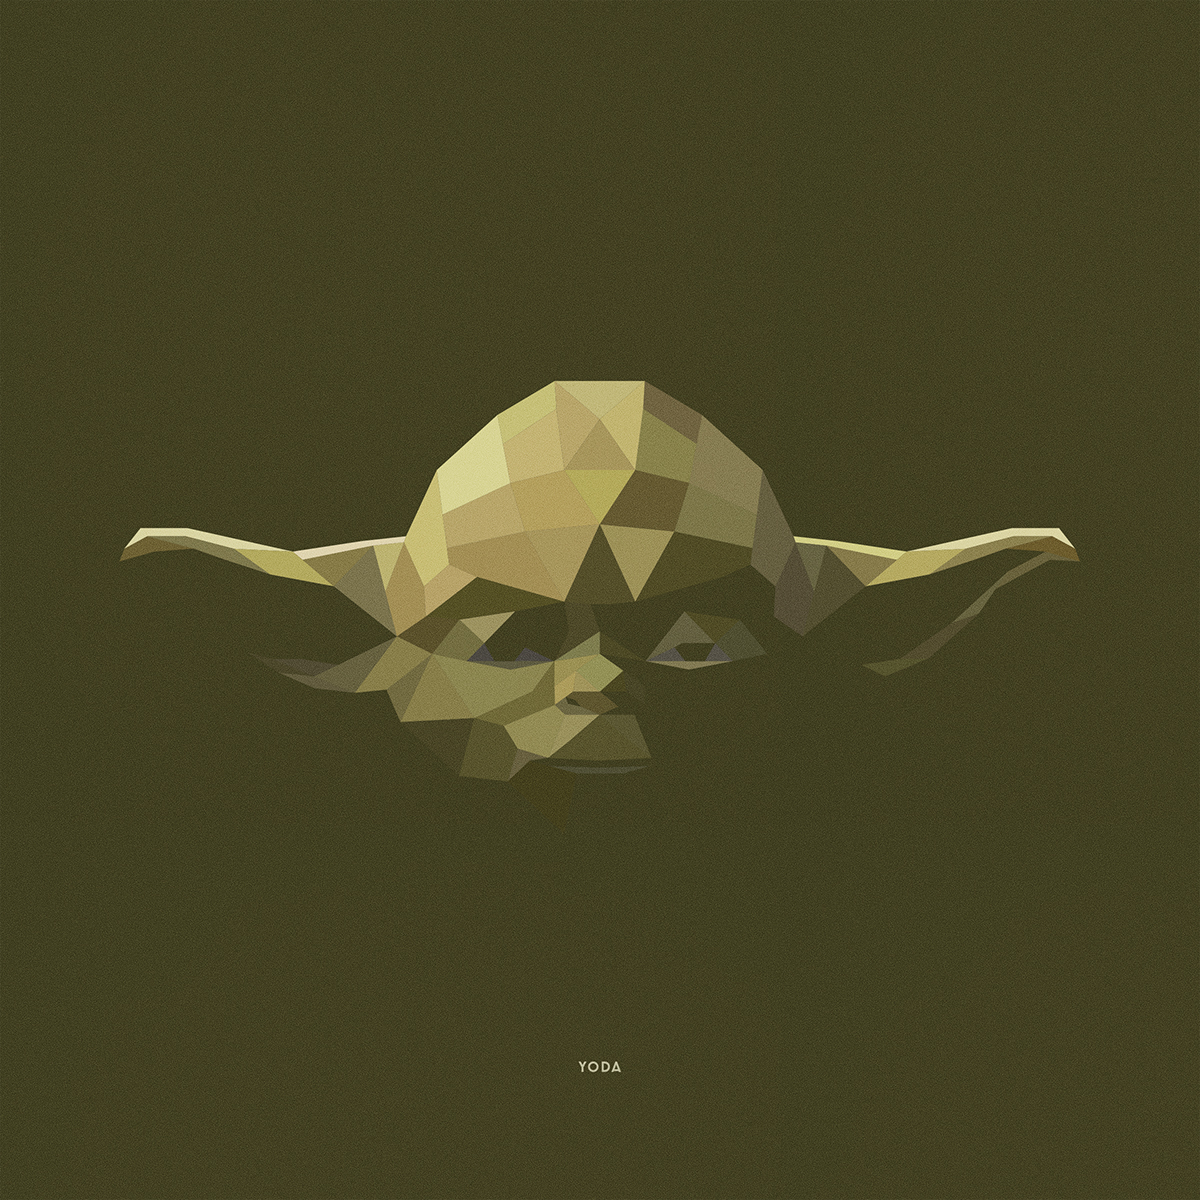 star wars geometric geometric design flat design darth vader storm trooper character illustration Low Poly c-3po imperial guard scout trooper Chewbacca Lucas Films